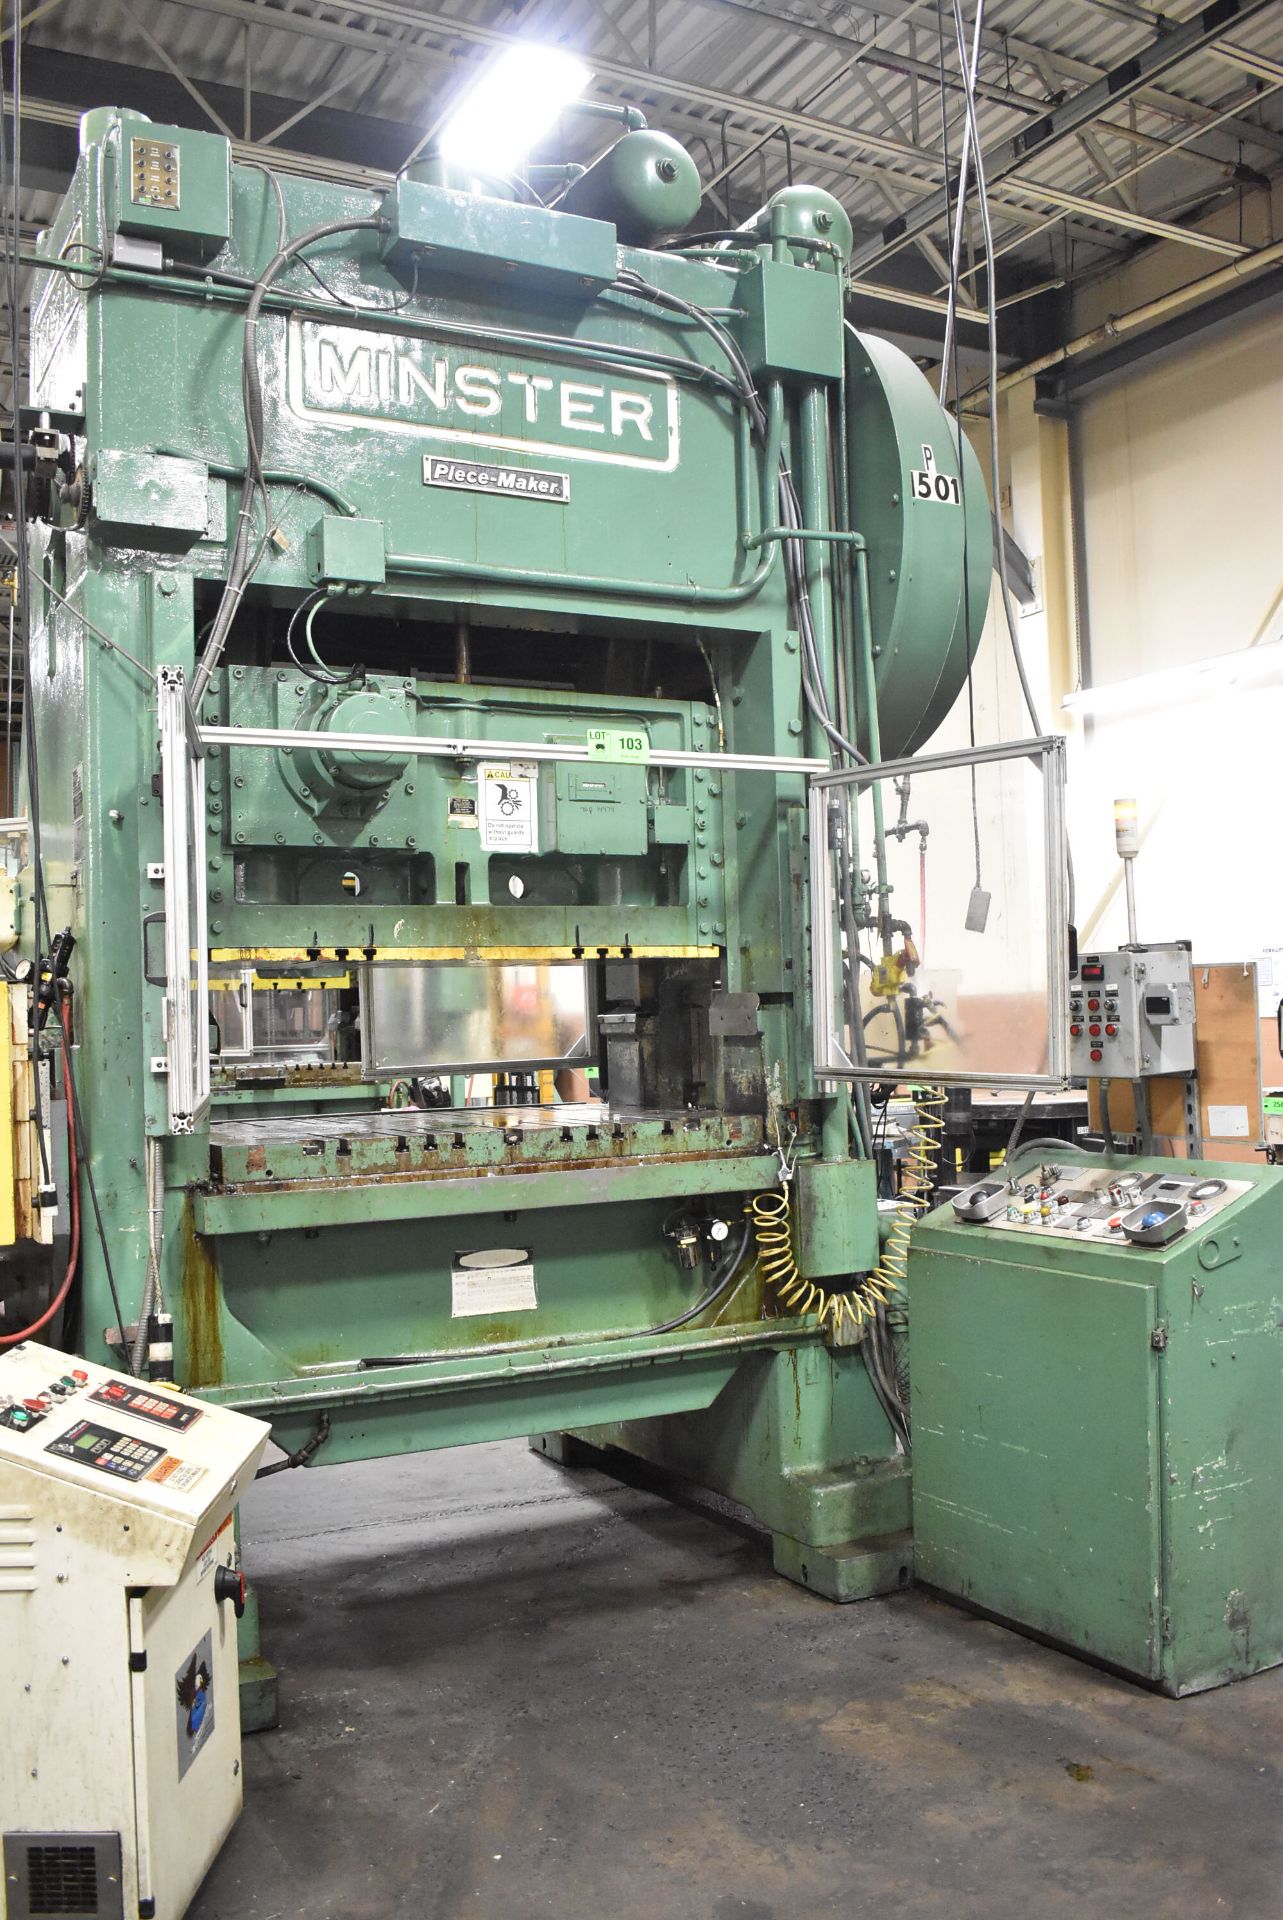 MINSTER P2-150-60 PIECE-MAKER 150 TON CAPACITY MECHANICAL STRAIGHT SIDE STAMPING PRESS WITH 40-80